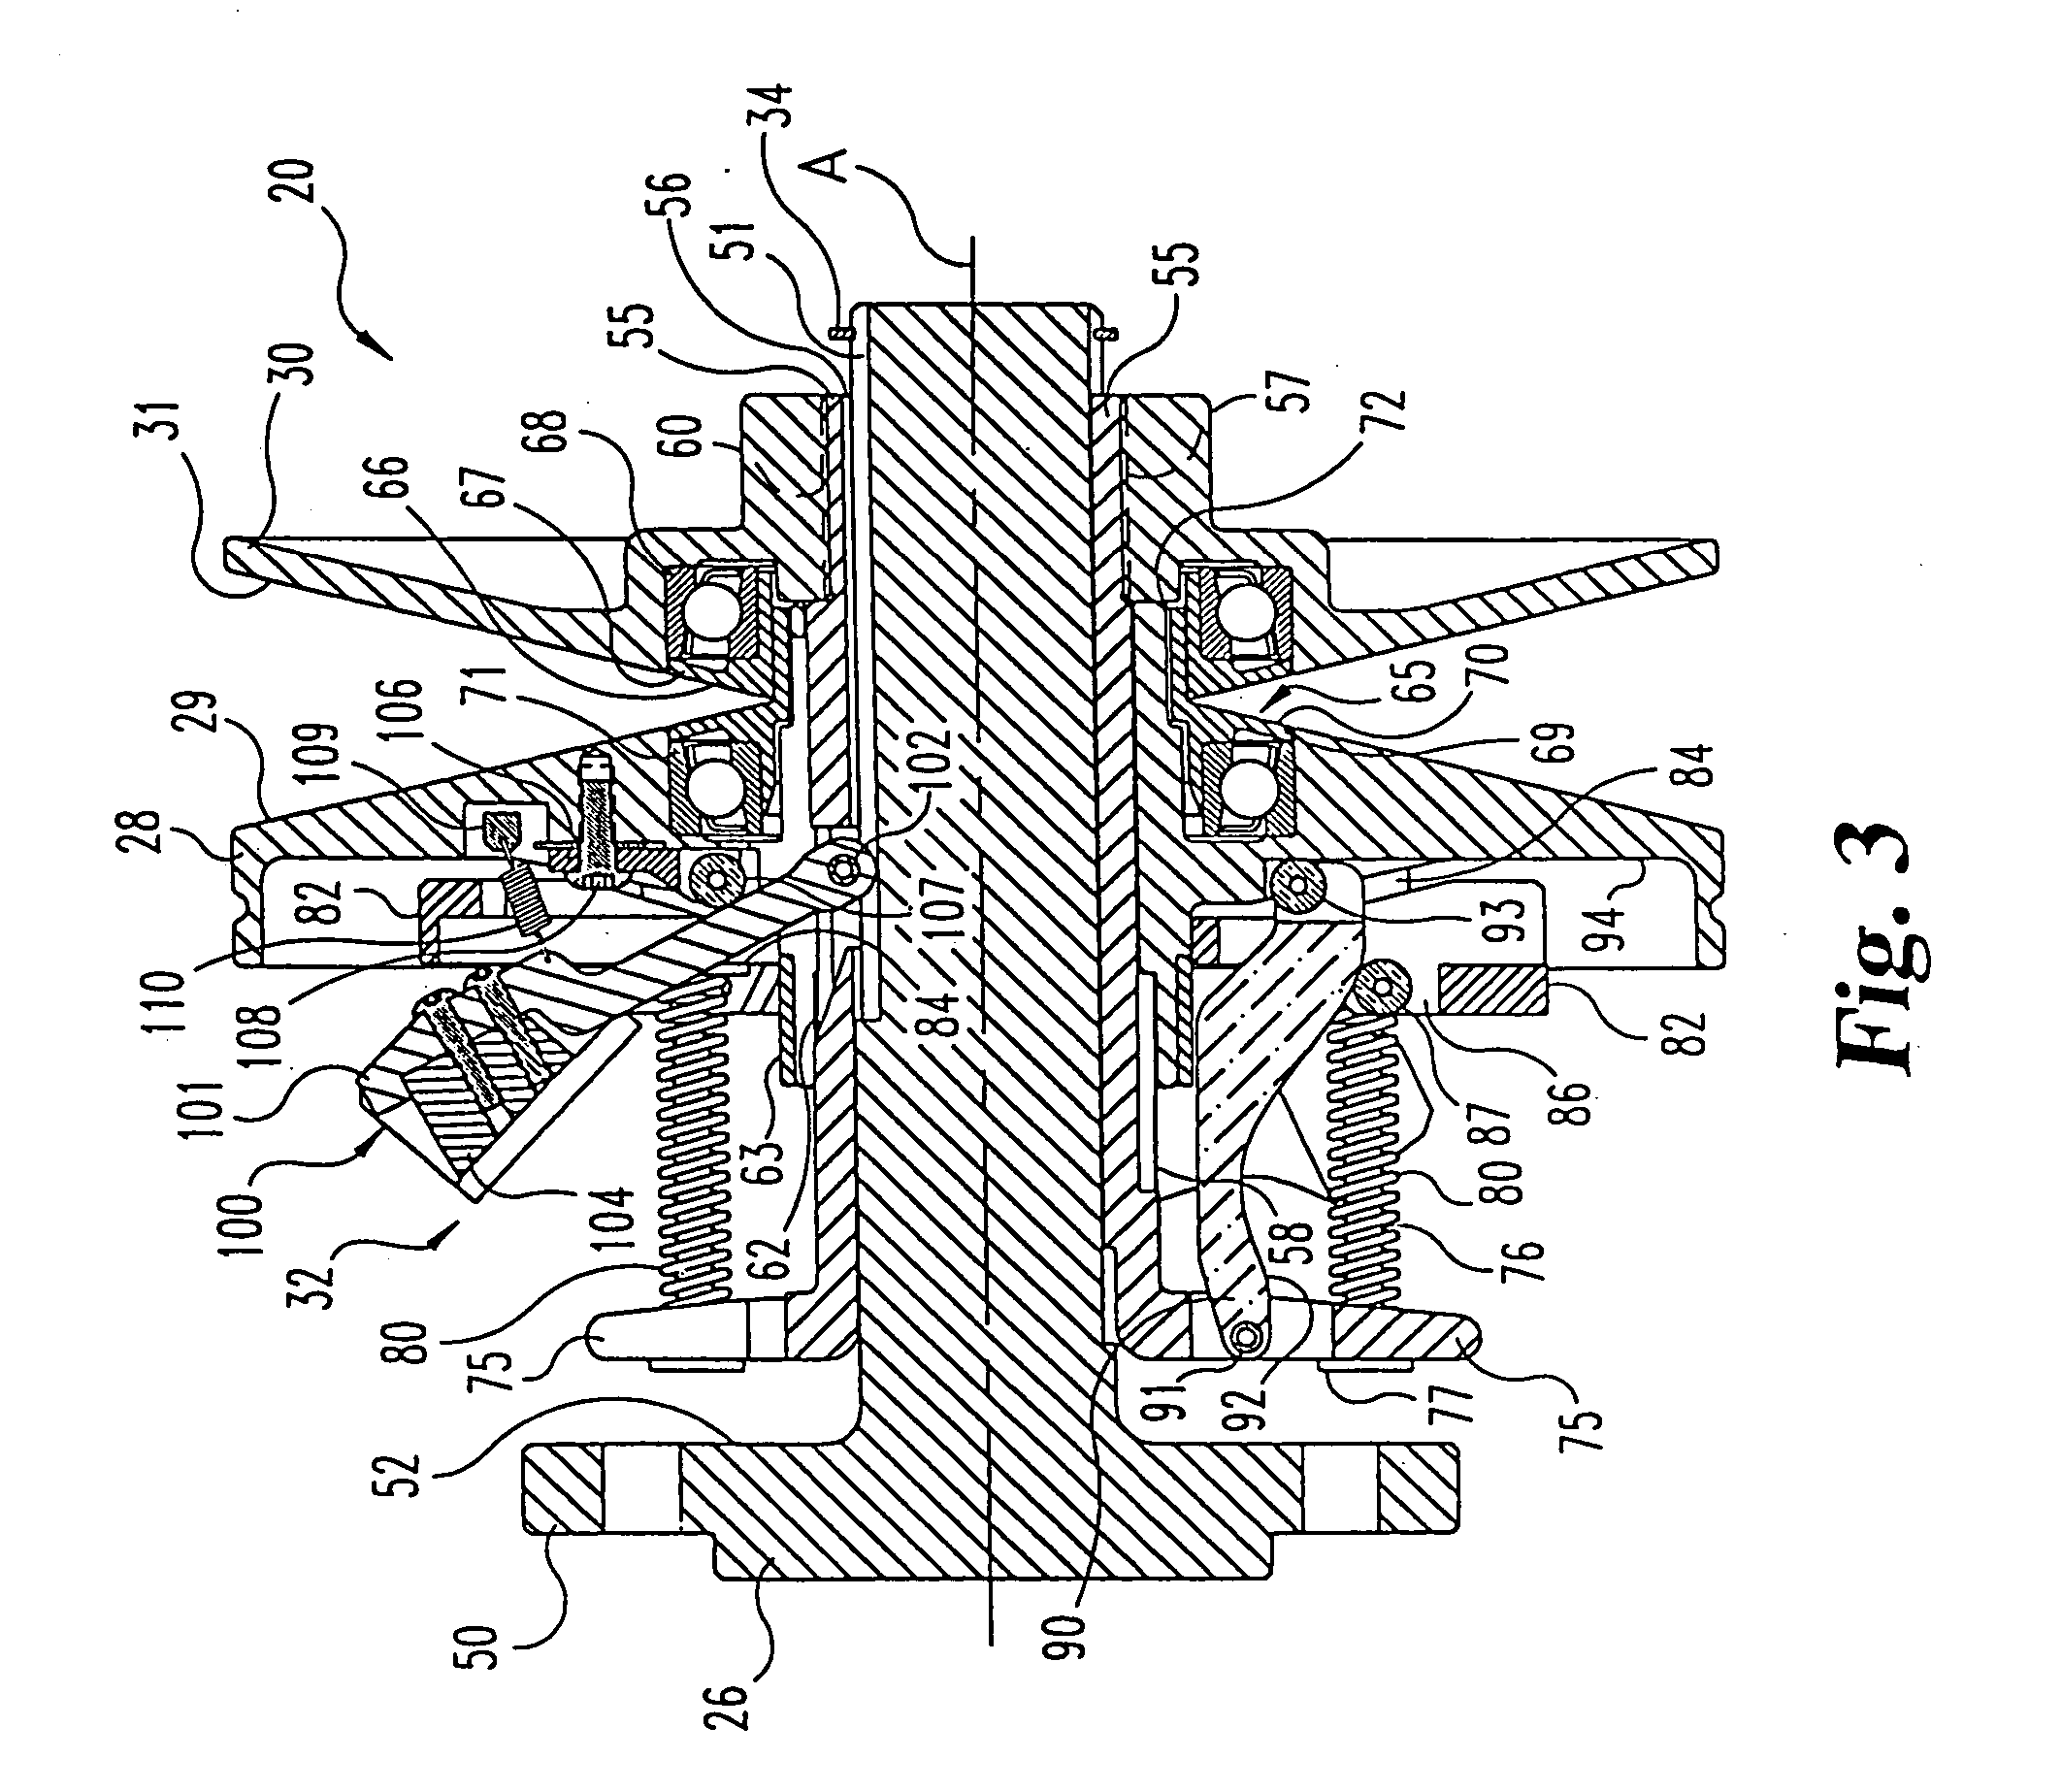 Continuously variable belt drive system